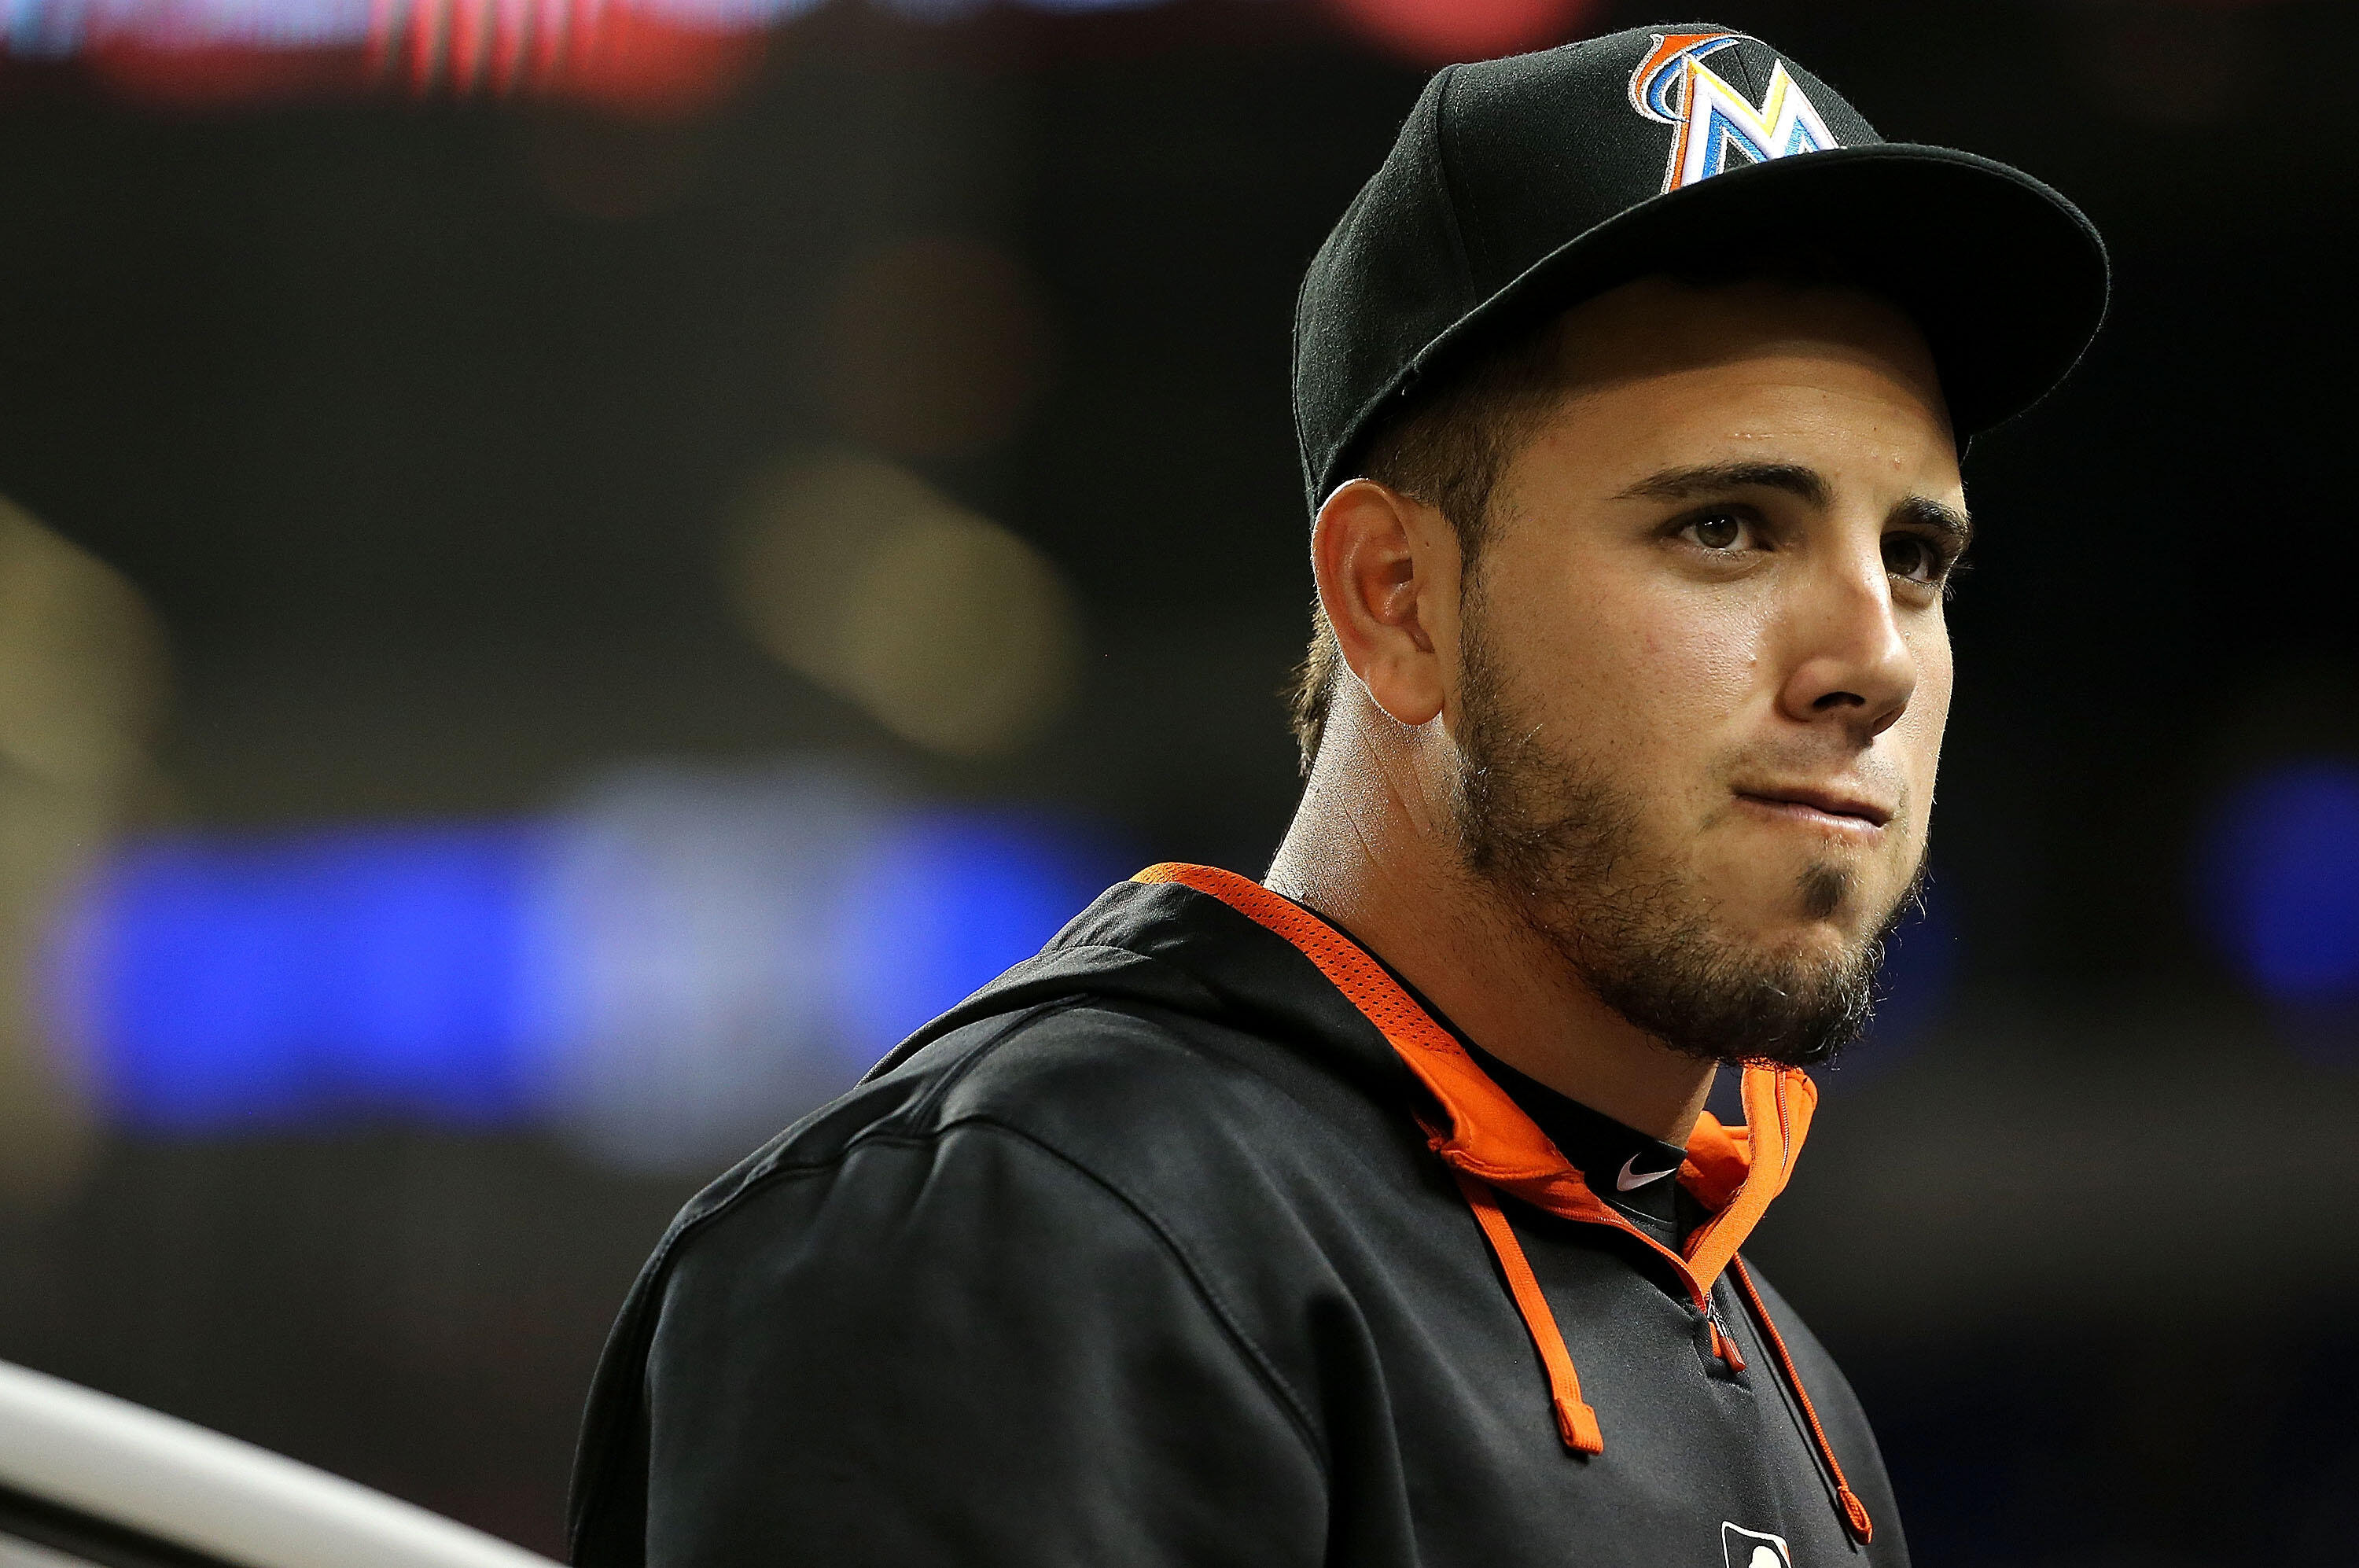 Late Miami Marlins pitcher Jose Fernandez was framed in deadly